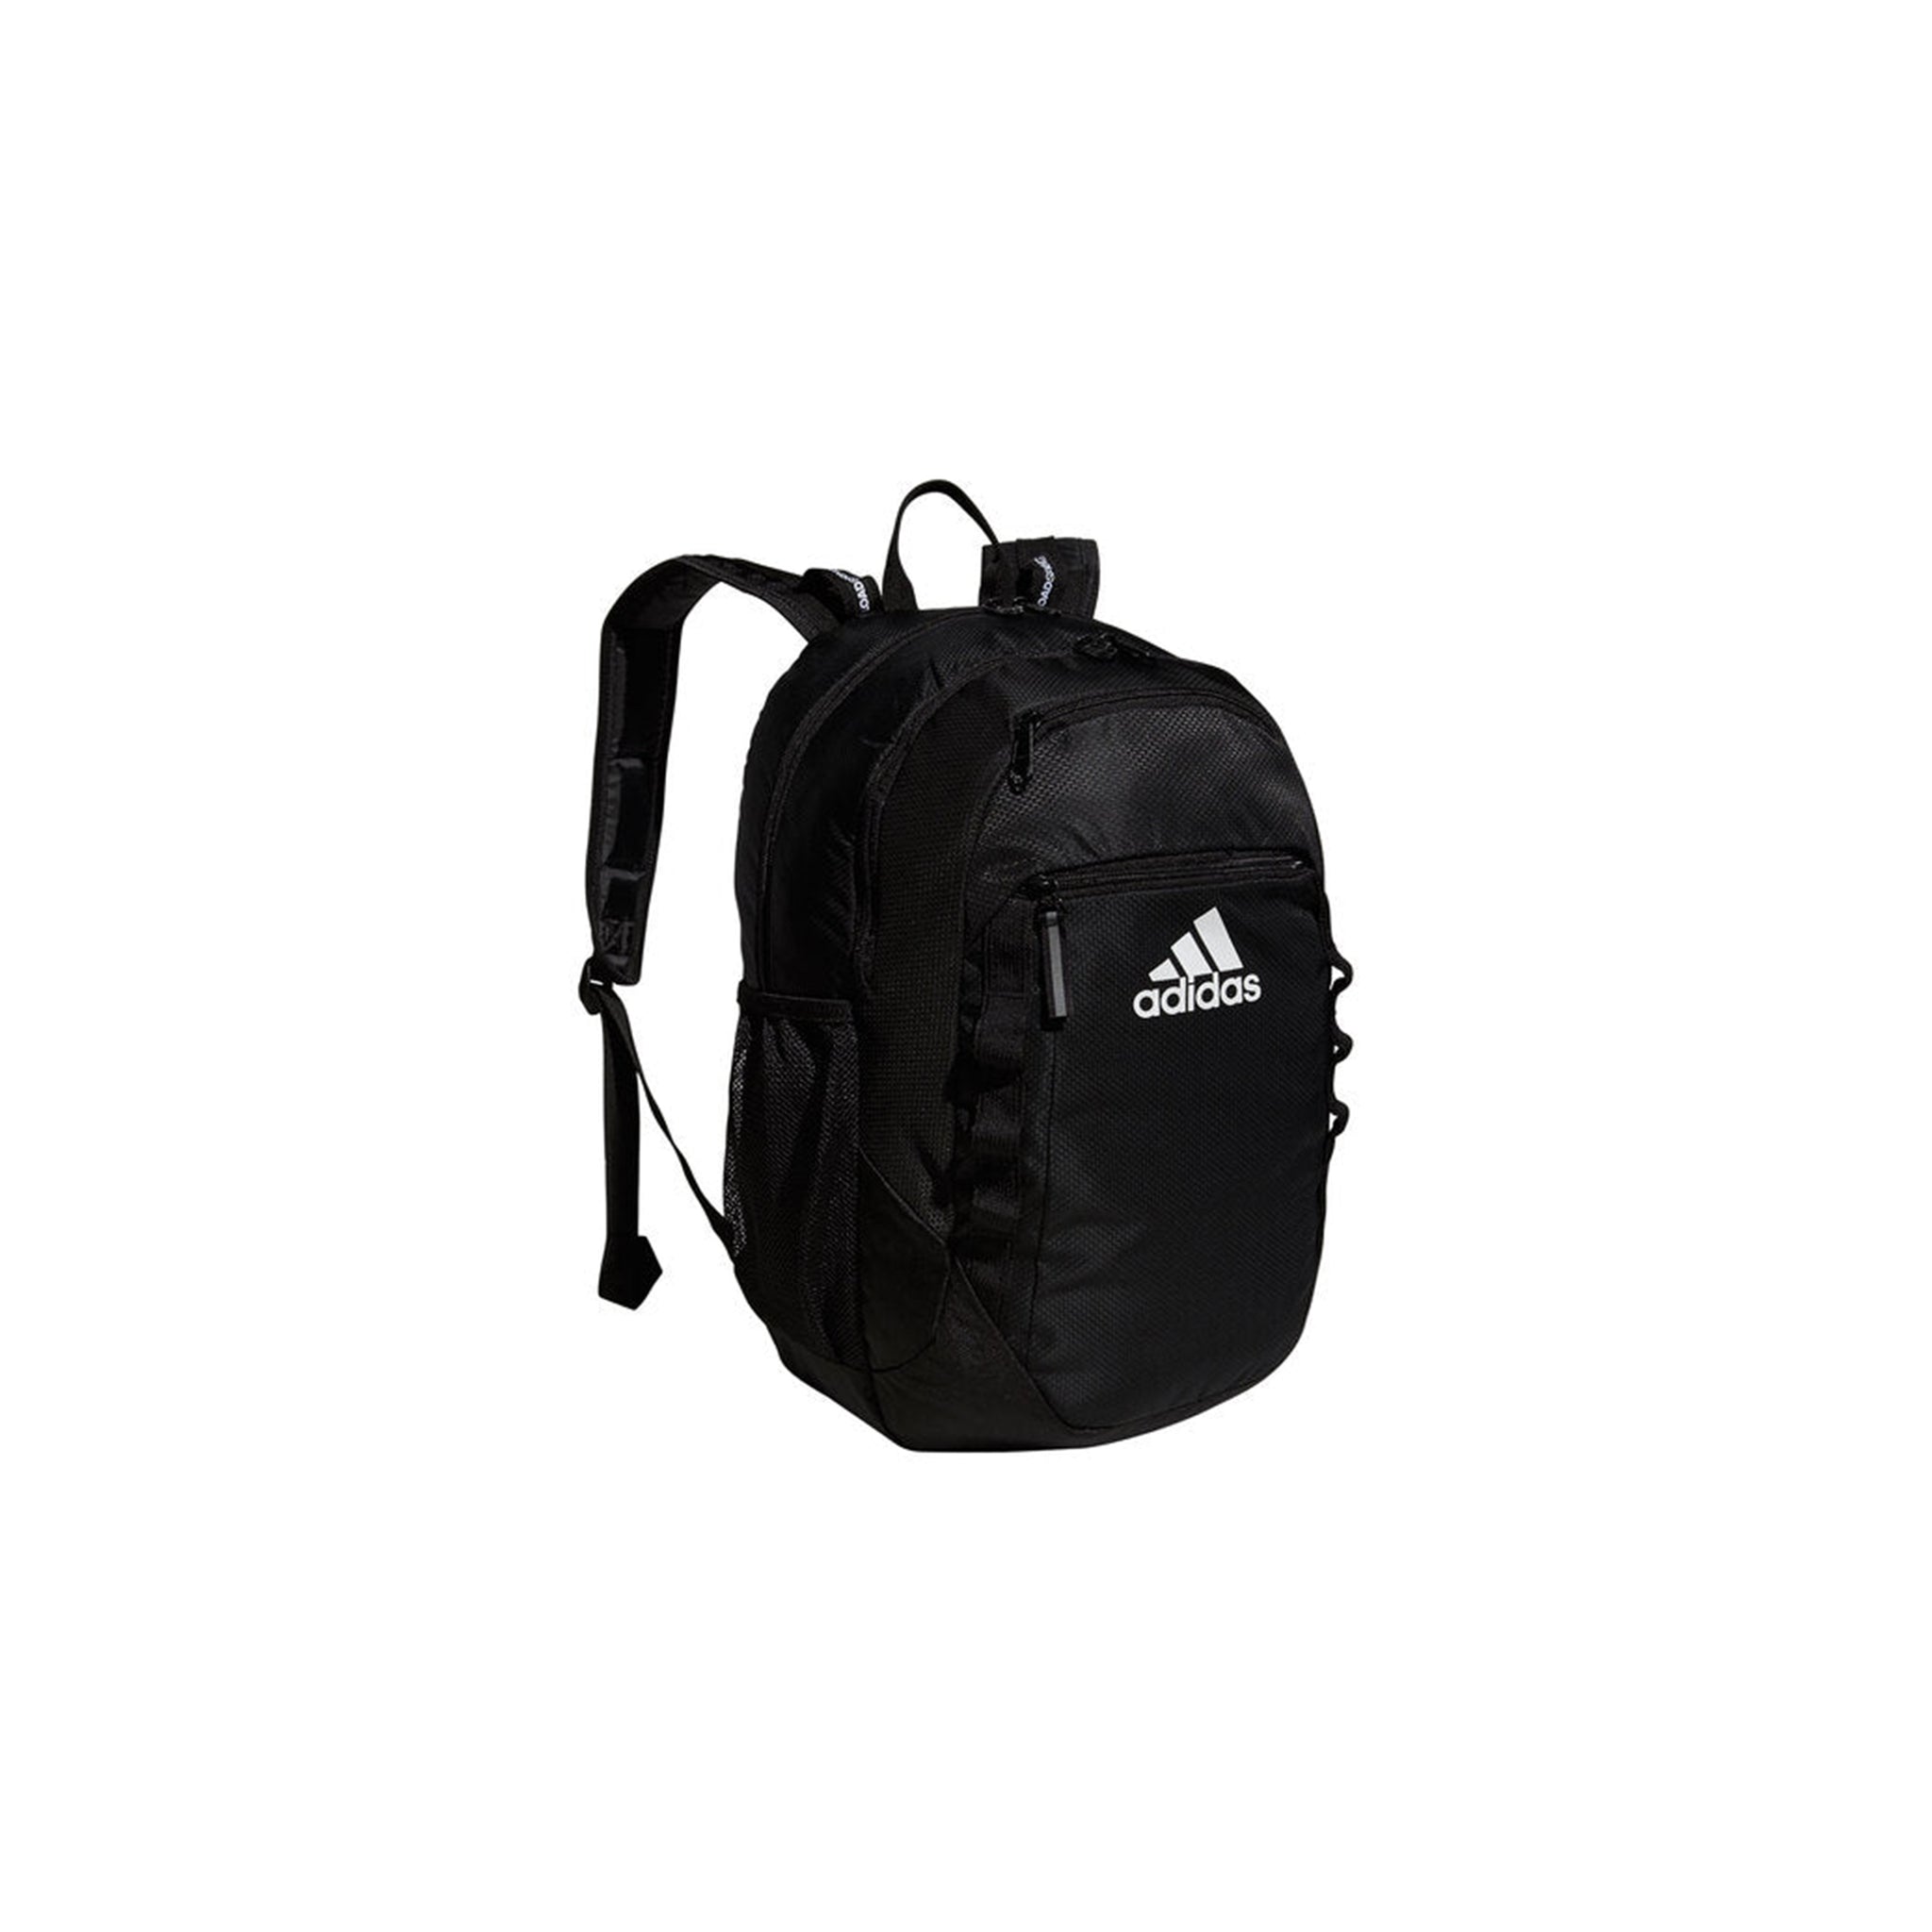 ADIDAS Excel 6 Backpack